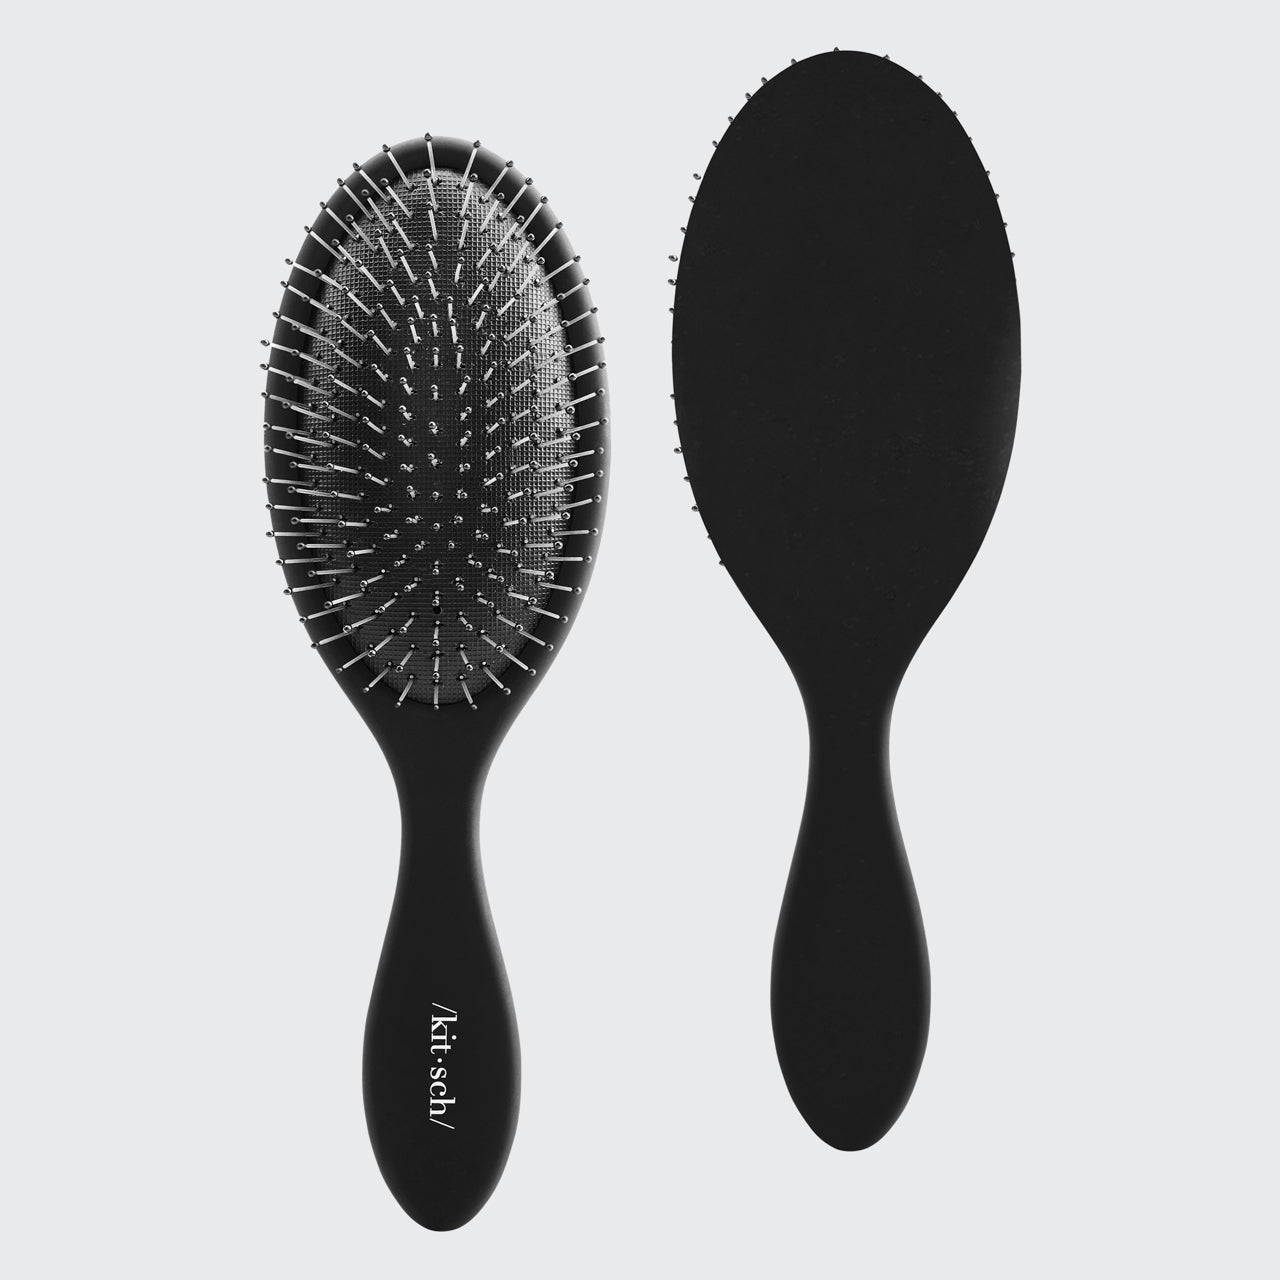 Aria Beauty - We know, cleaning a hairbrush doesn't sound